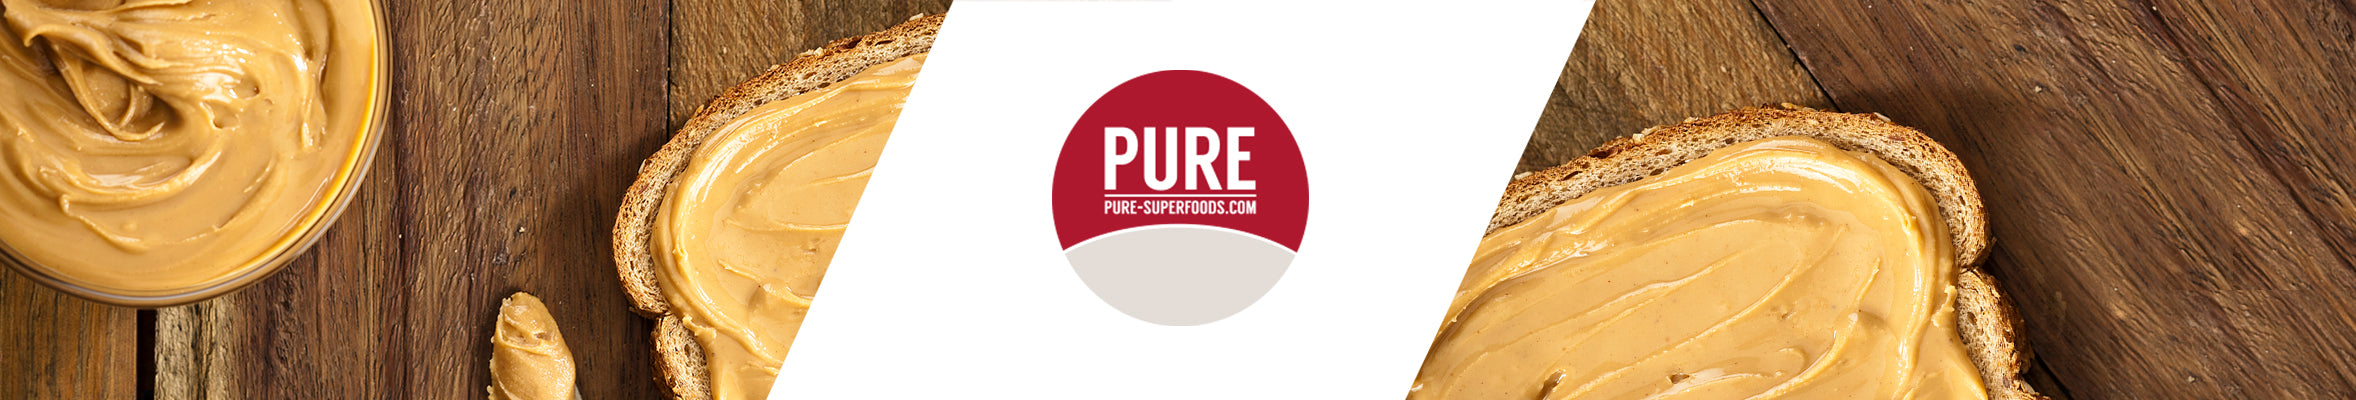 Pure-superfoods